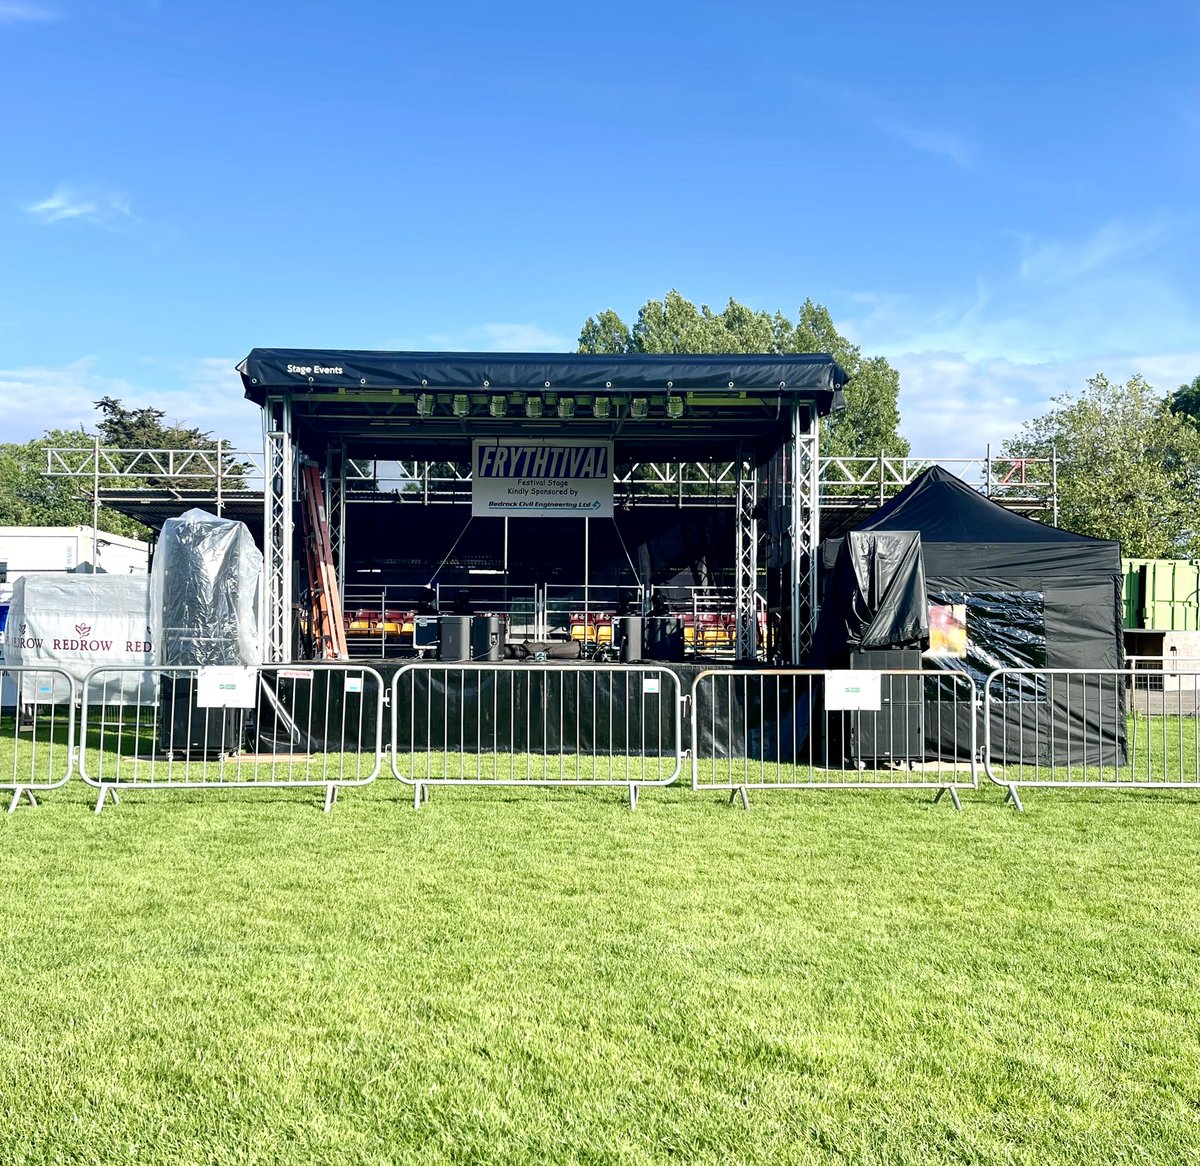 Here’s a sneak peek at what tomorrow will look like 👀 EXTREMELY LIMITED TICKETS LEFT BEFORE WE SELL OUT!!🎟️ Get your last minute tickets here ➡️ bit.ly/frythtival24 @nailseapeeps @nailseatown